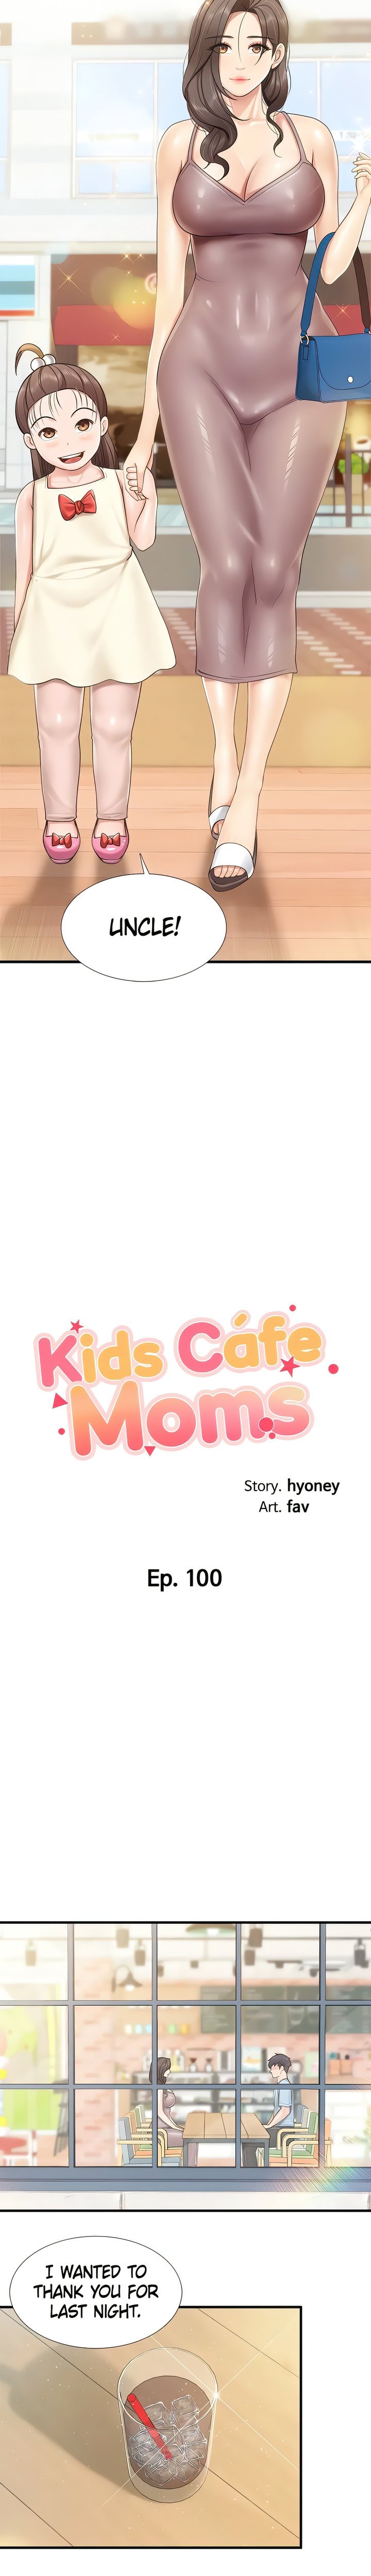 welcome-to-kids-cafe-chap-100-1